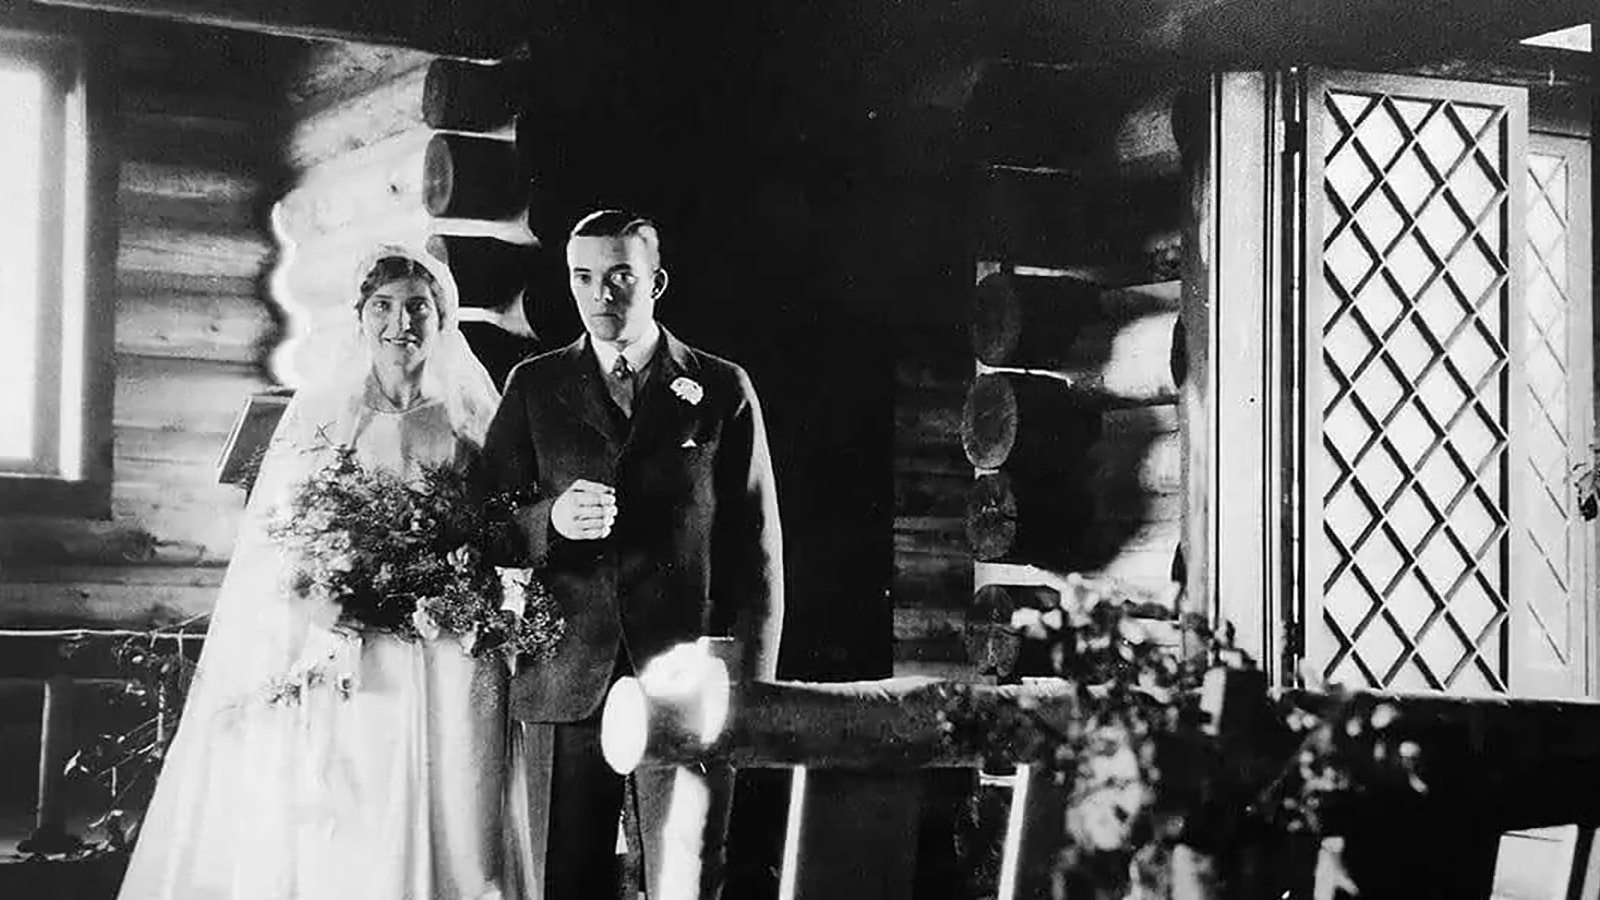 Ellen M Jones and Jack Dornan were the first couple to be married in the chapel.